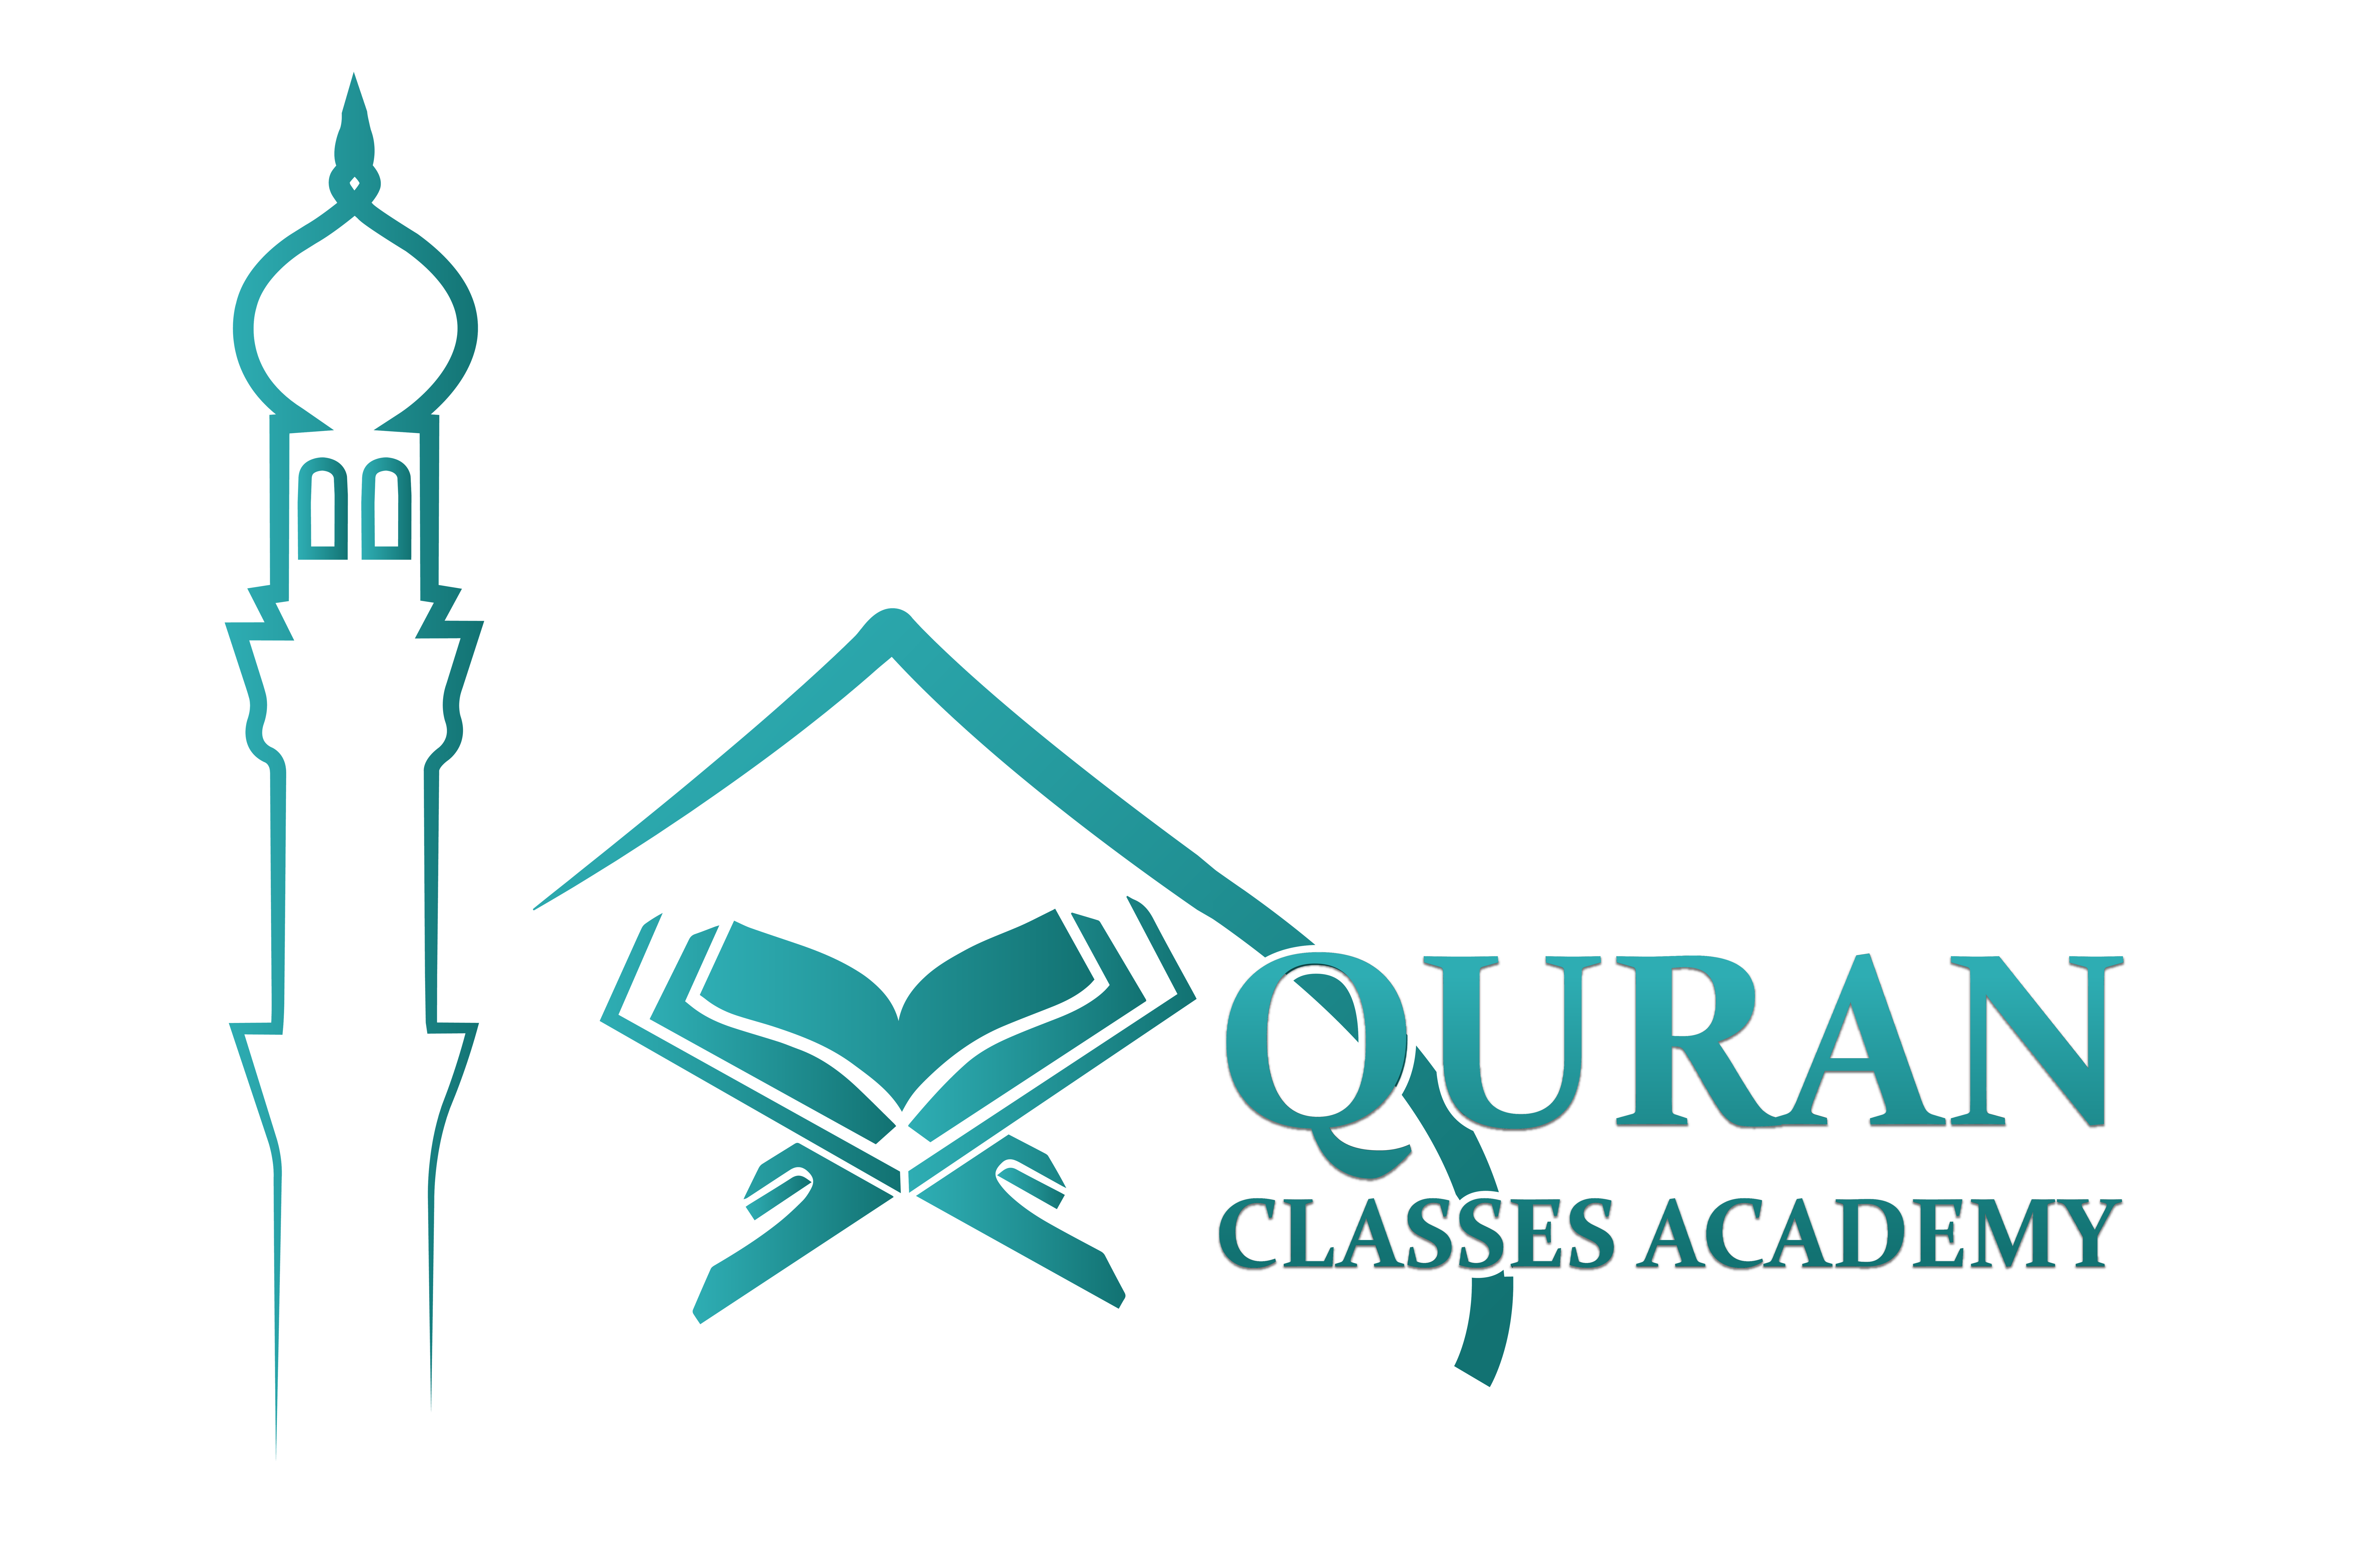 Learn Quran Classes Academy | 8+ Years of Experience